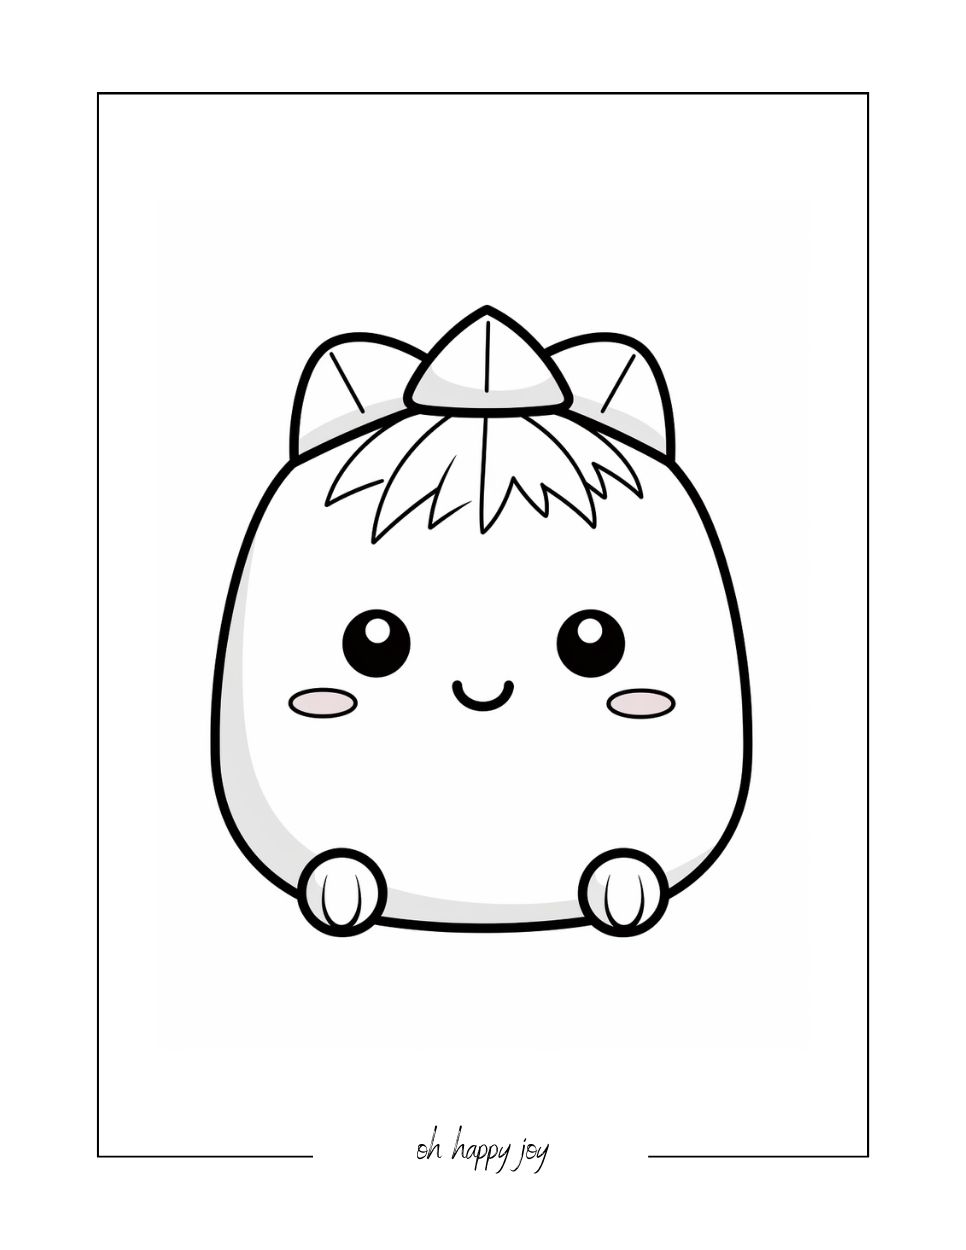 Quiet squishmallow coloring page